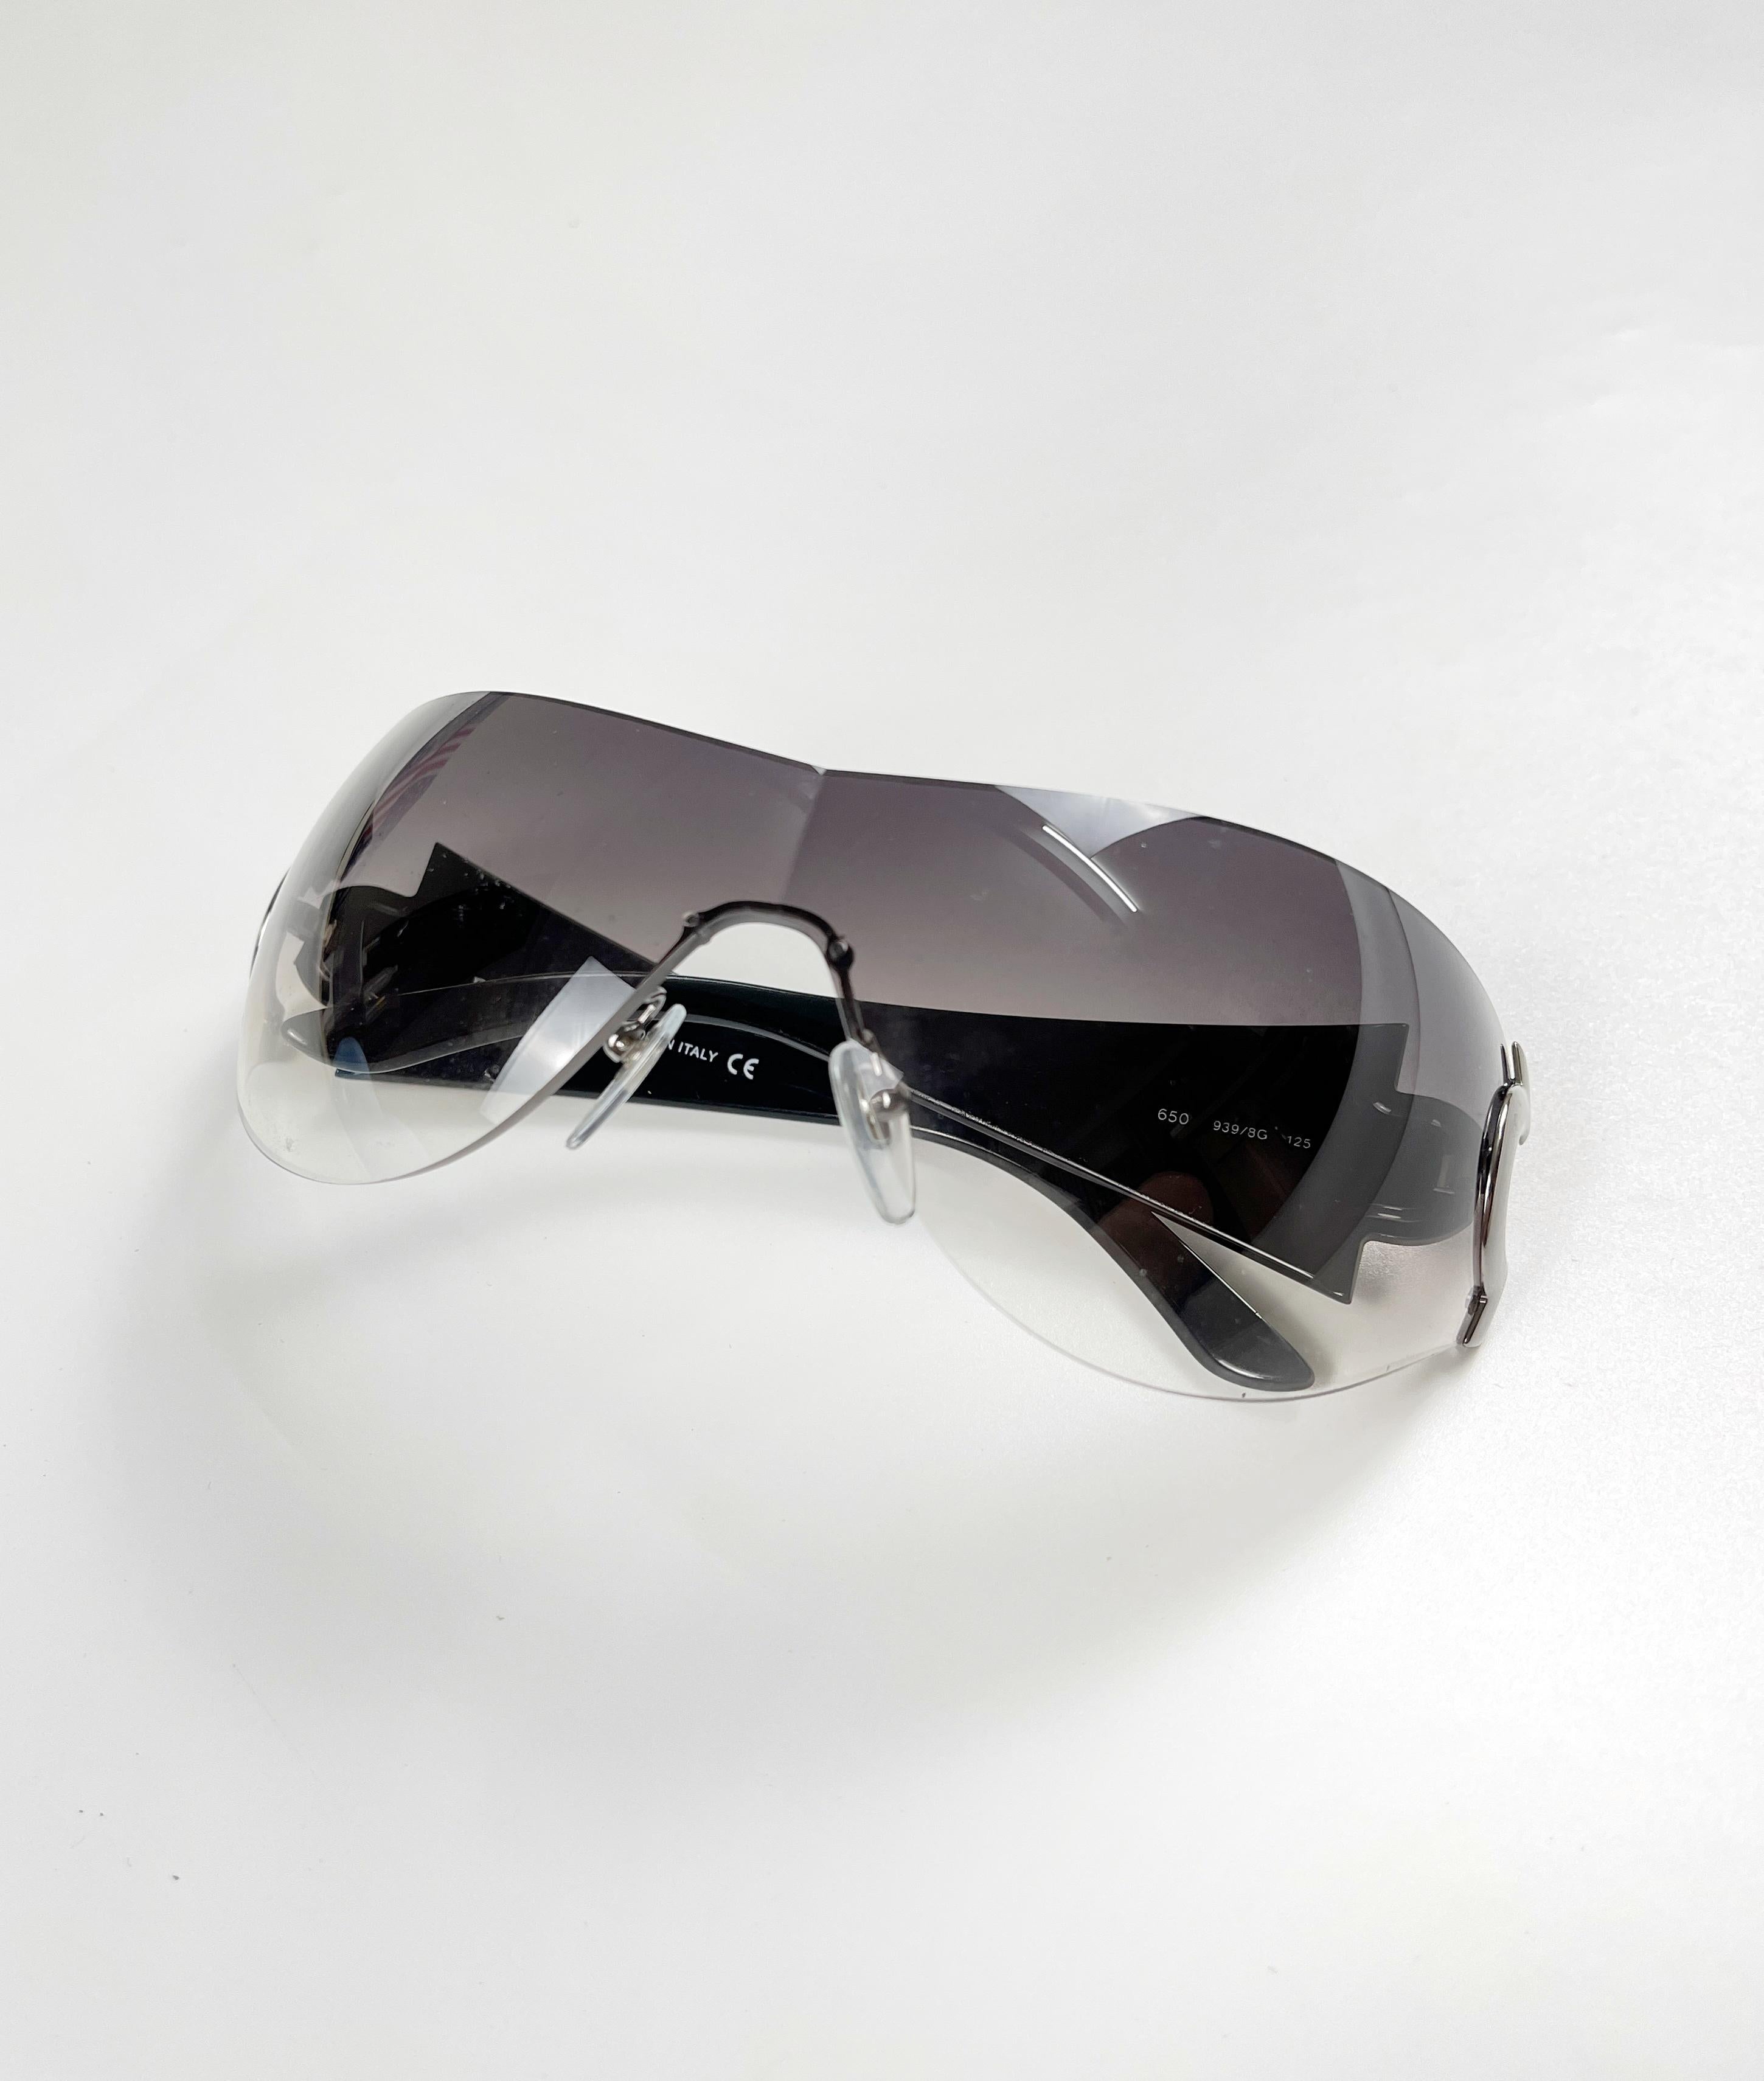 Sunglasses from luxury Italian fashion house Bvlgari.

The sunglasses is in new condition.

Condition: New, without tags.

Size: One size fits all 

For any questions regarding inquiries, please message us via direct message.

